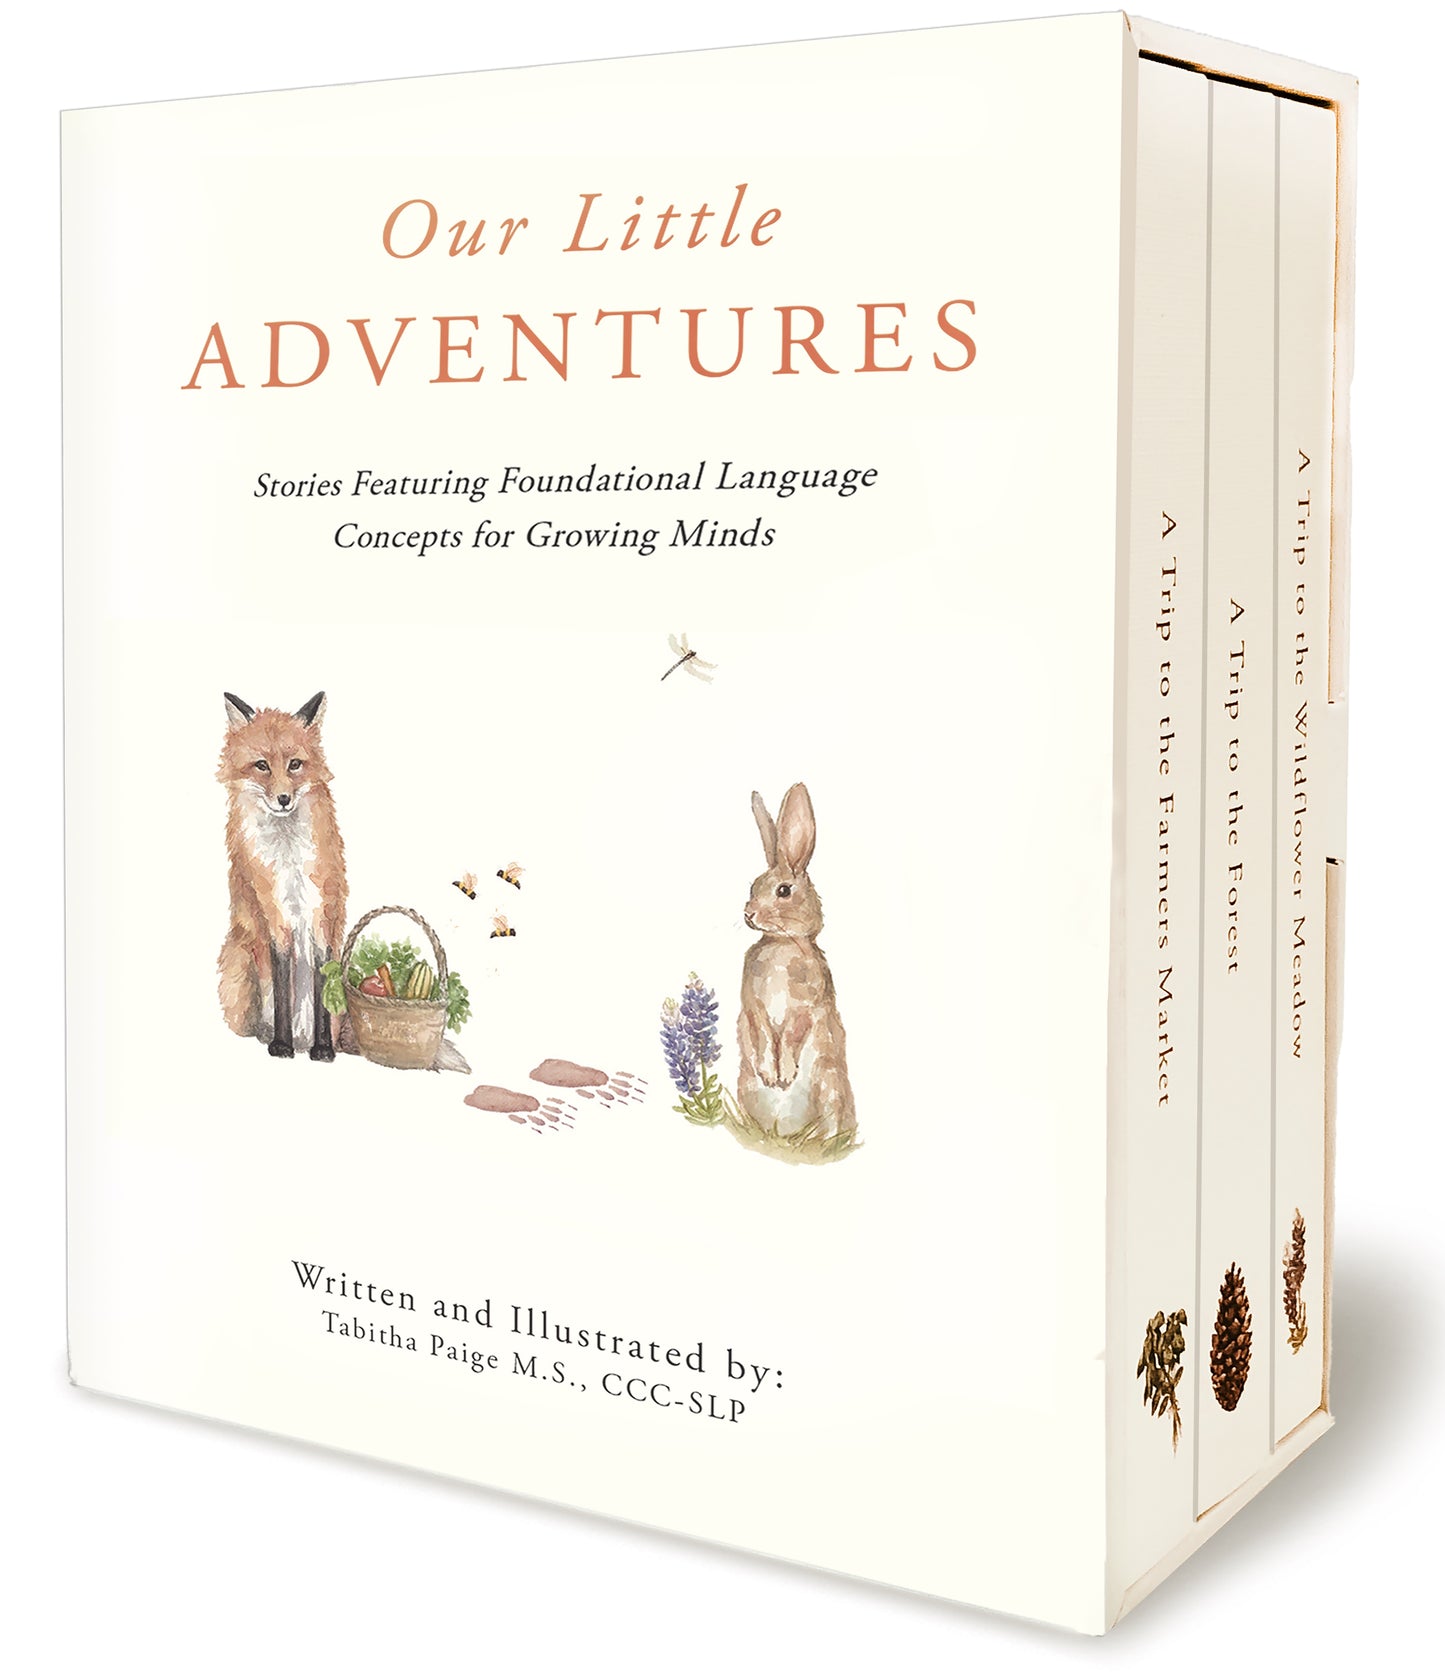 Our Little Adventures | Stories Featuring Foundational Language Concepts for Growing Minds